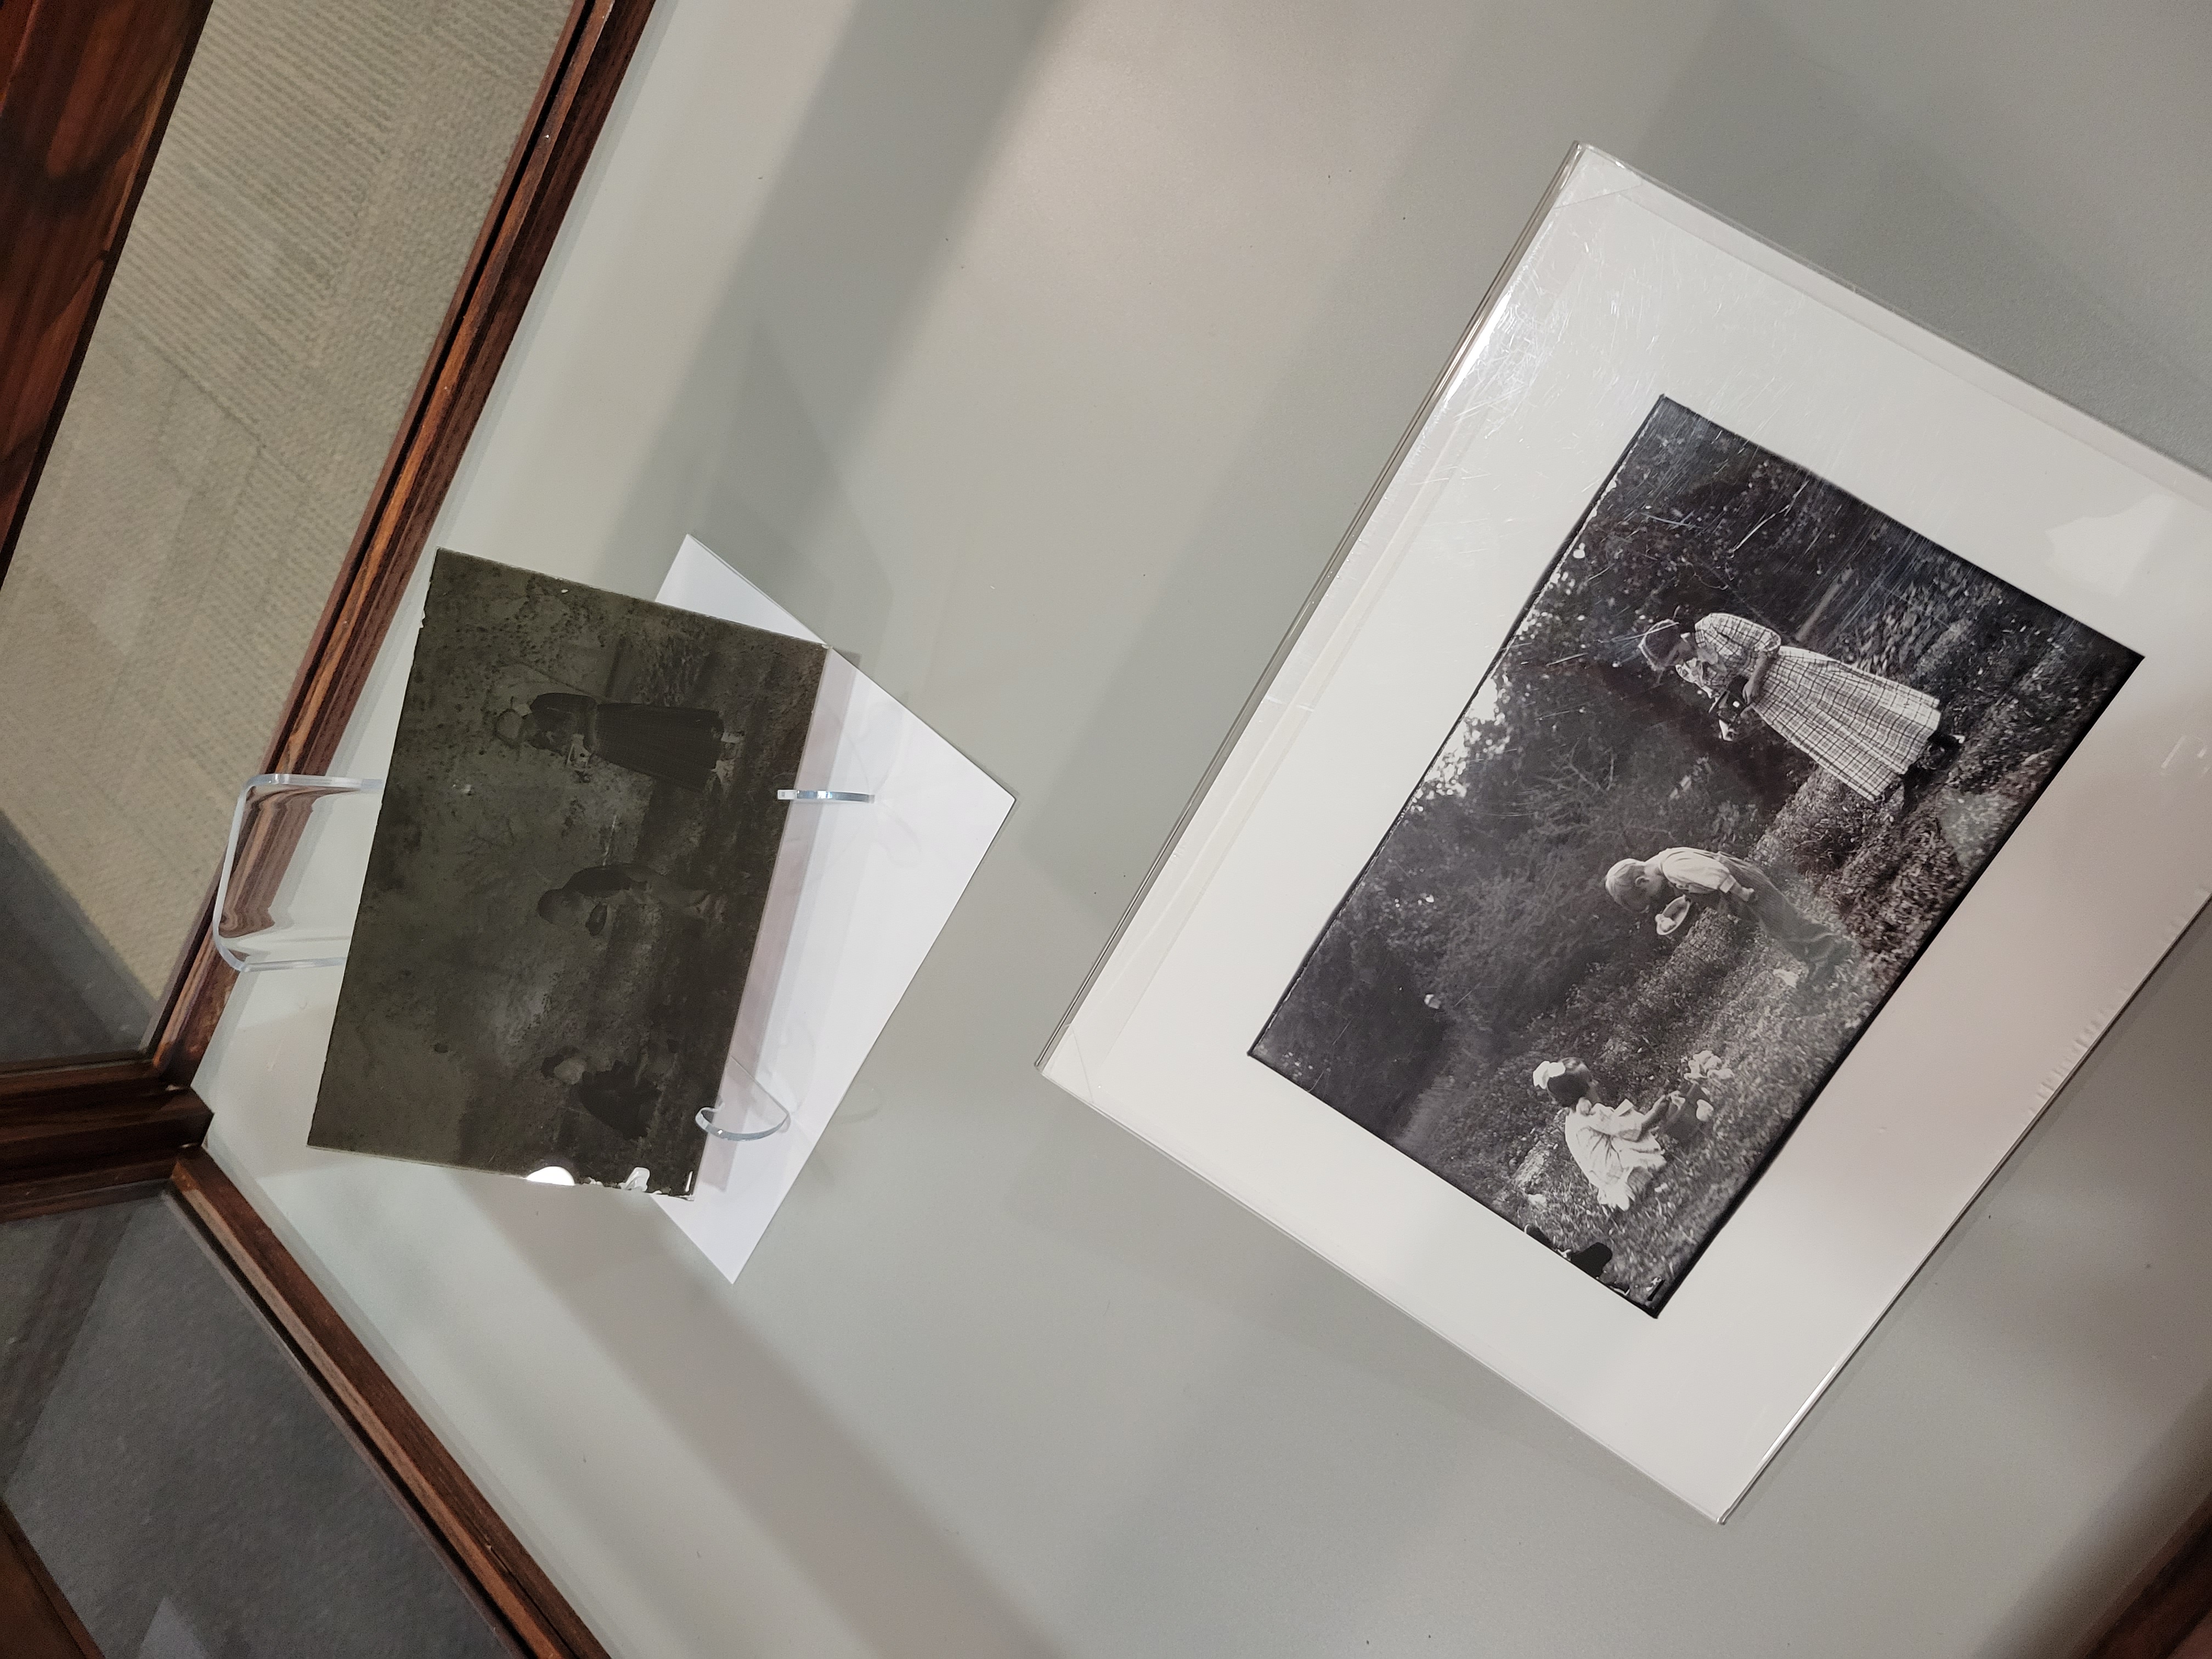 Image of a glass plate negative and a print photograph made from it